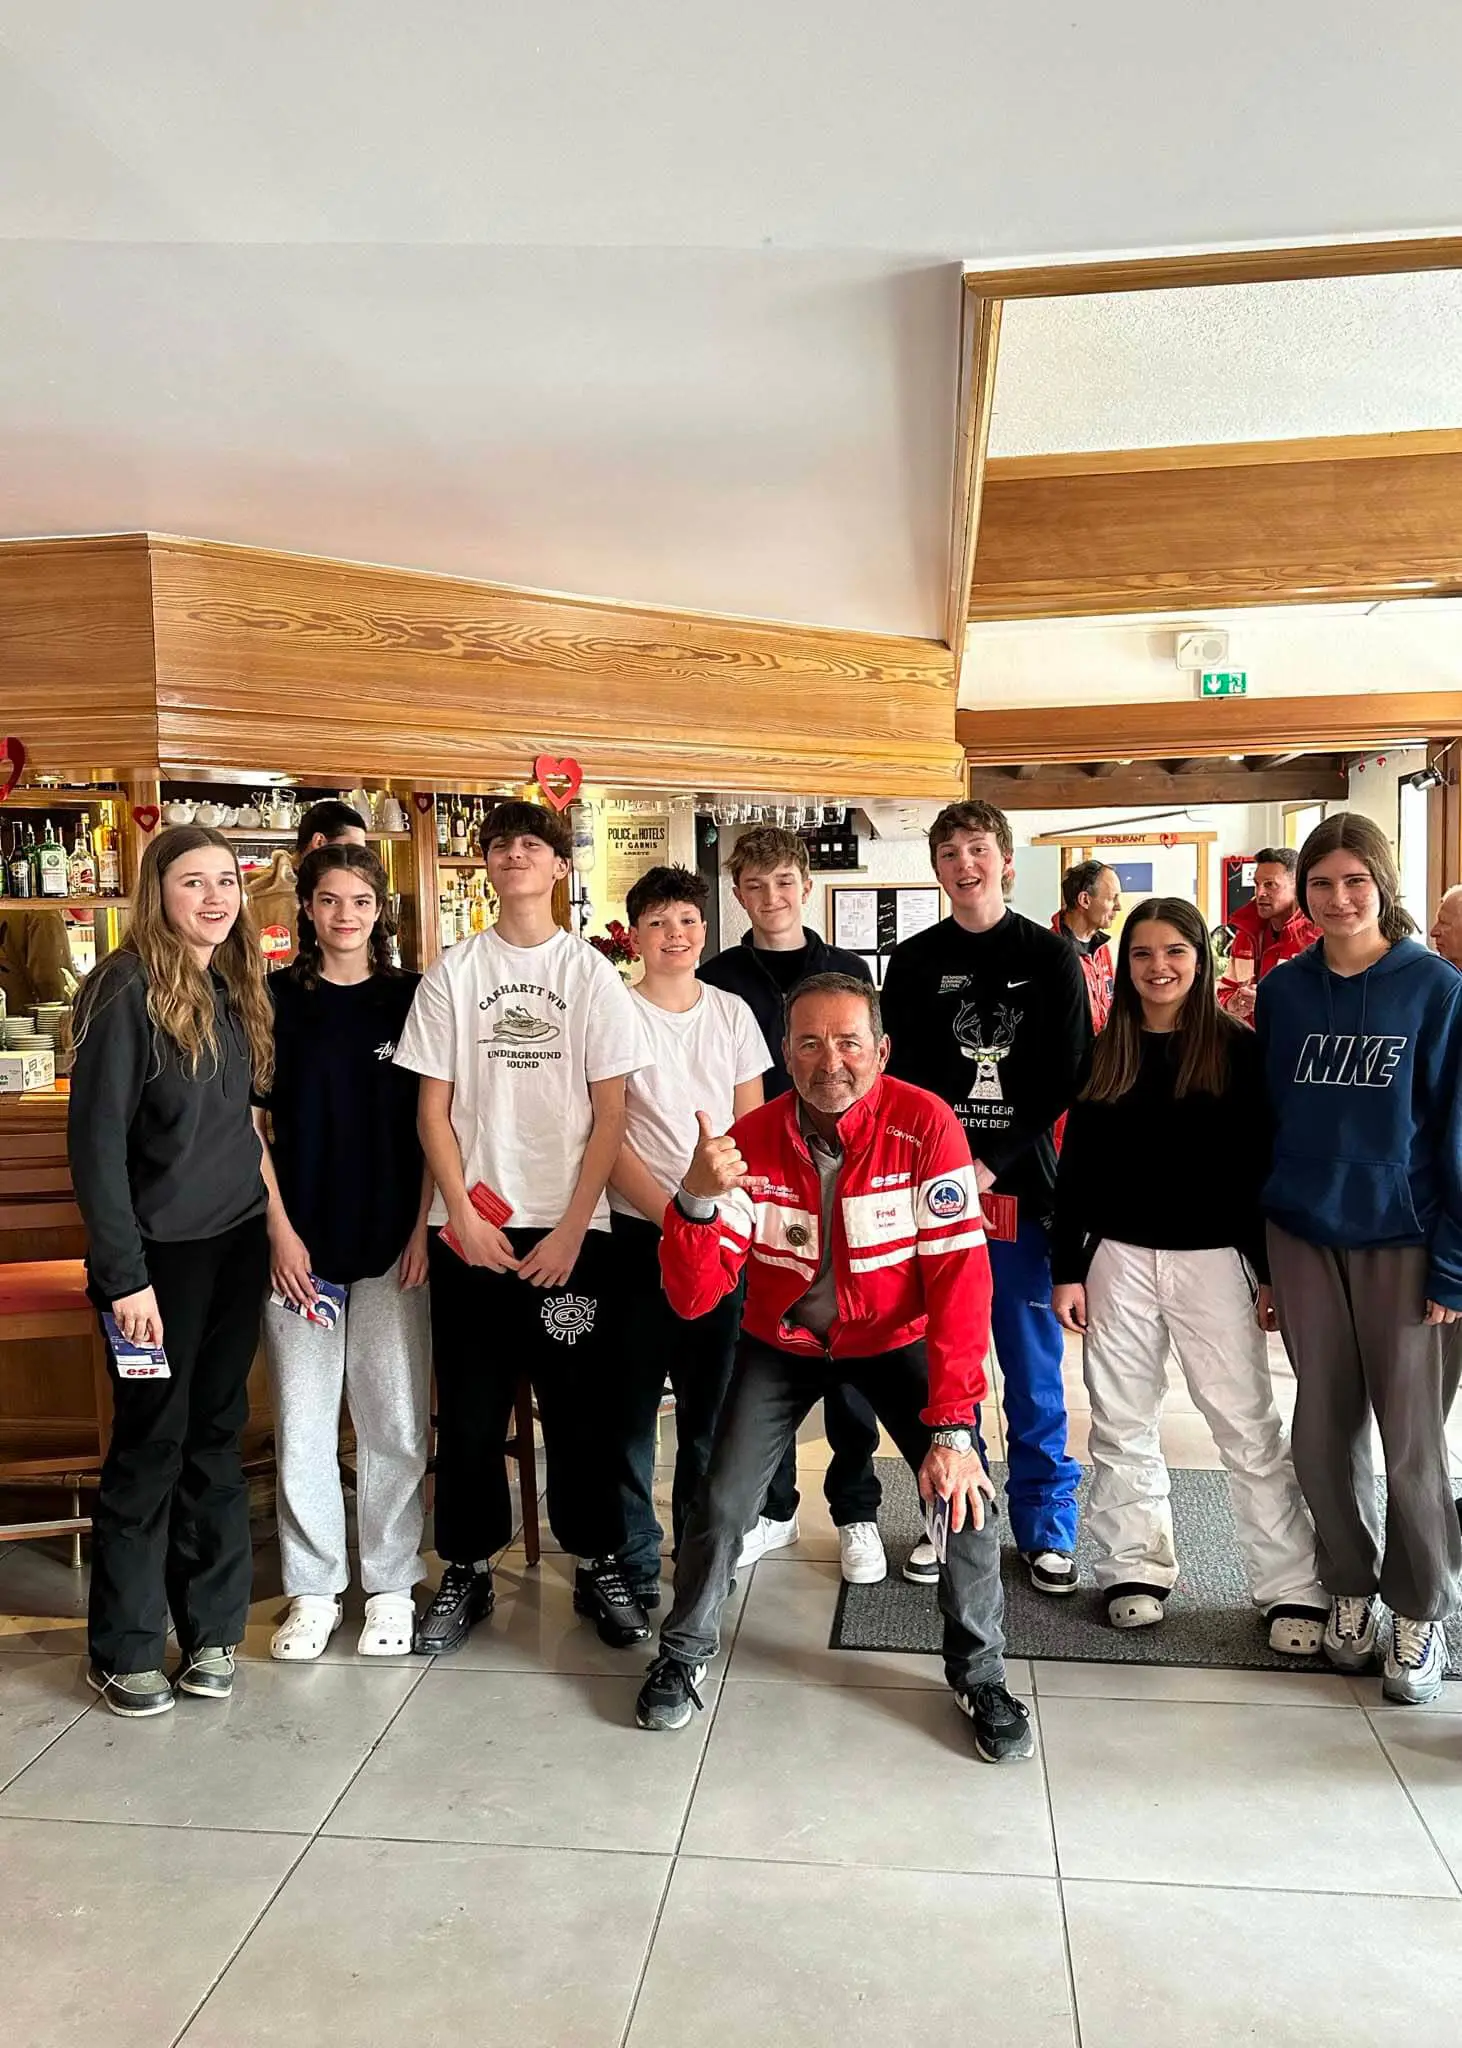 Senior pupils enjoying dinner during their ski trip to the Alps | Ibstock Place School, a private school near Richmond, Barnes, Putney, Kingston, and Wandsworth.